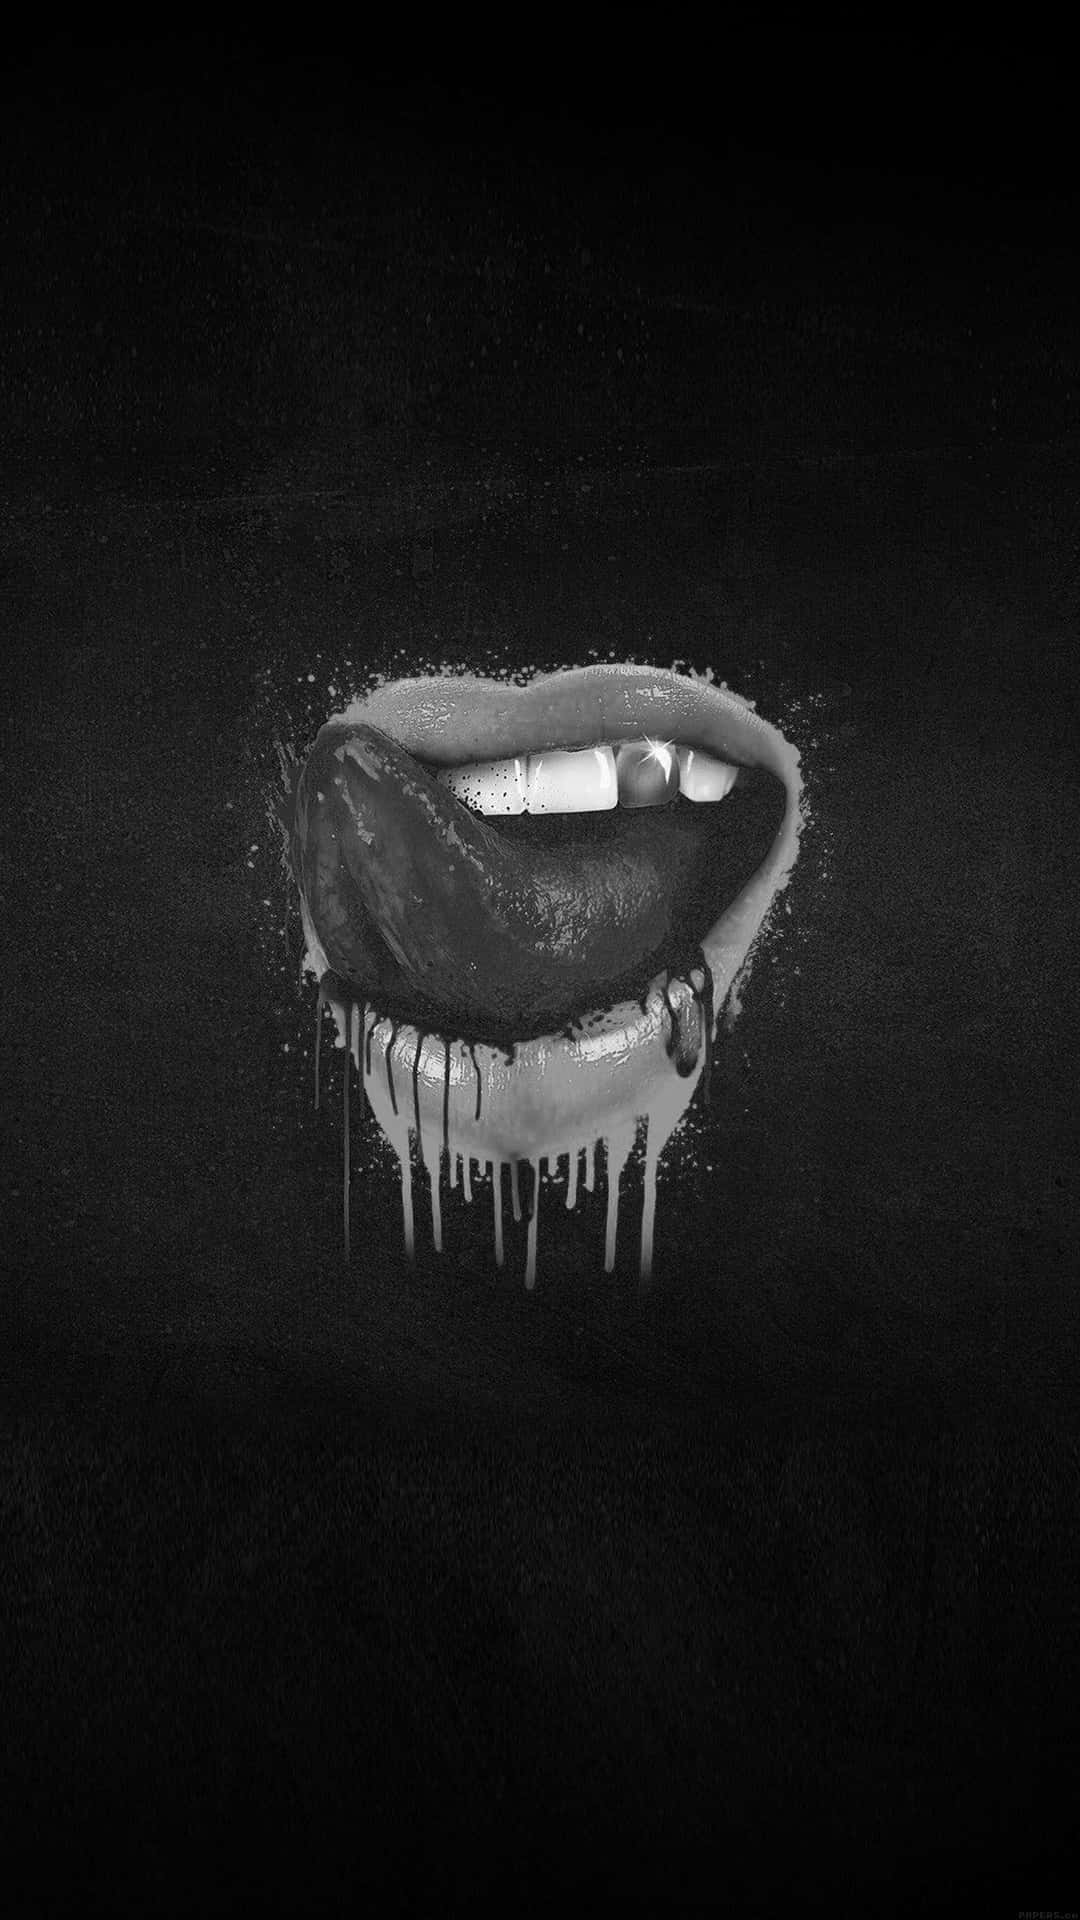 A Black And White Image Of A Mouth With Dripping Dripping